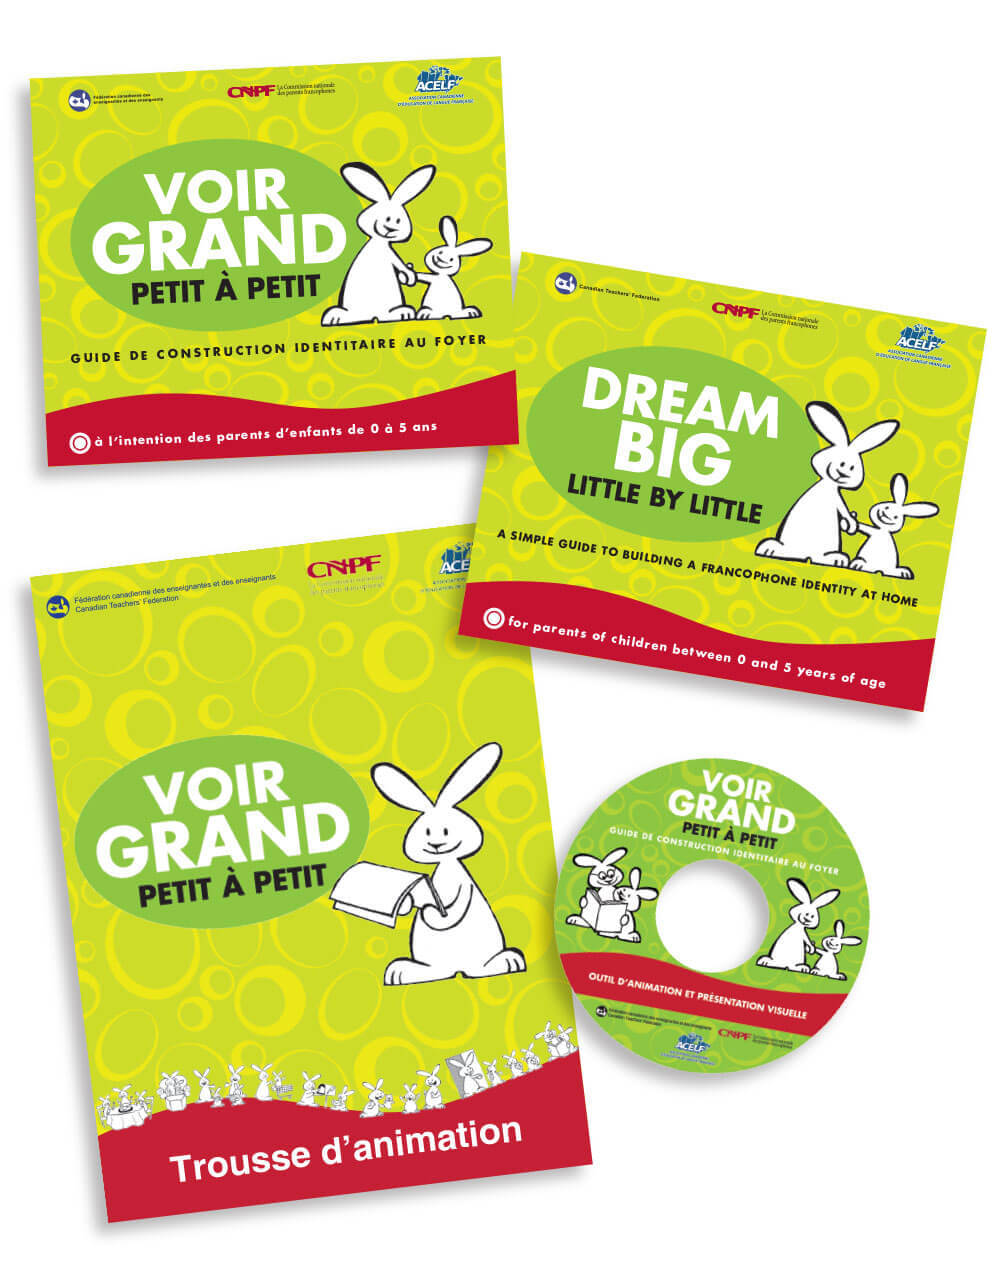 Dream Big, Little by Little (0 to 5 Years) – Facilitator’s Kit (in French only)